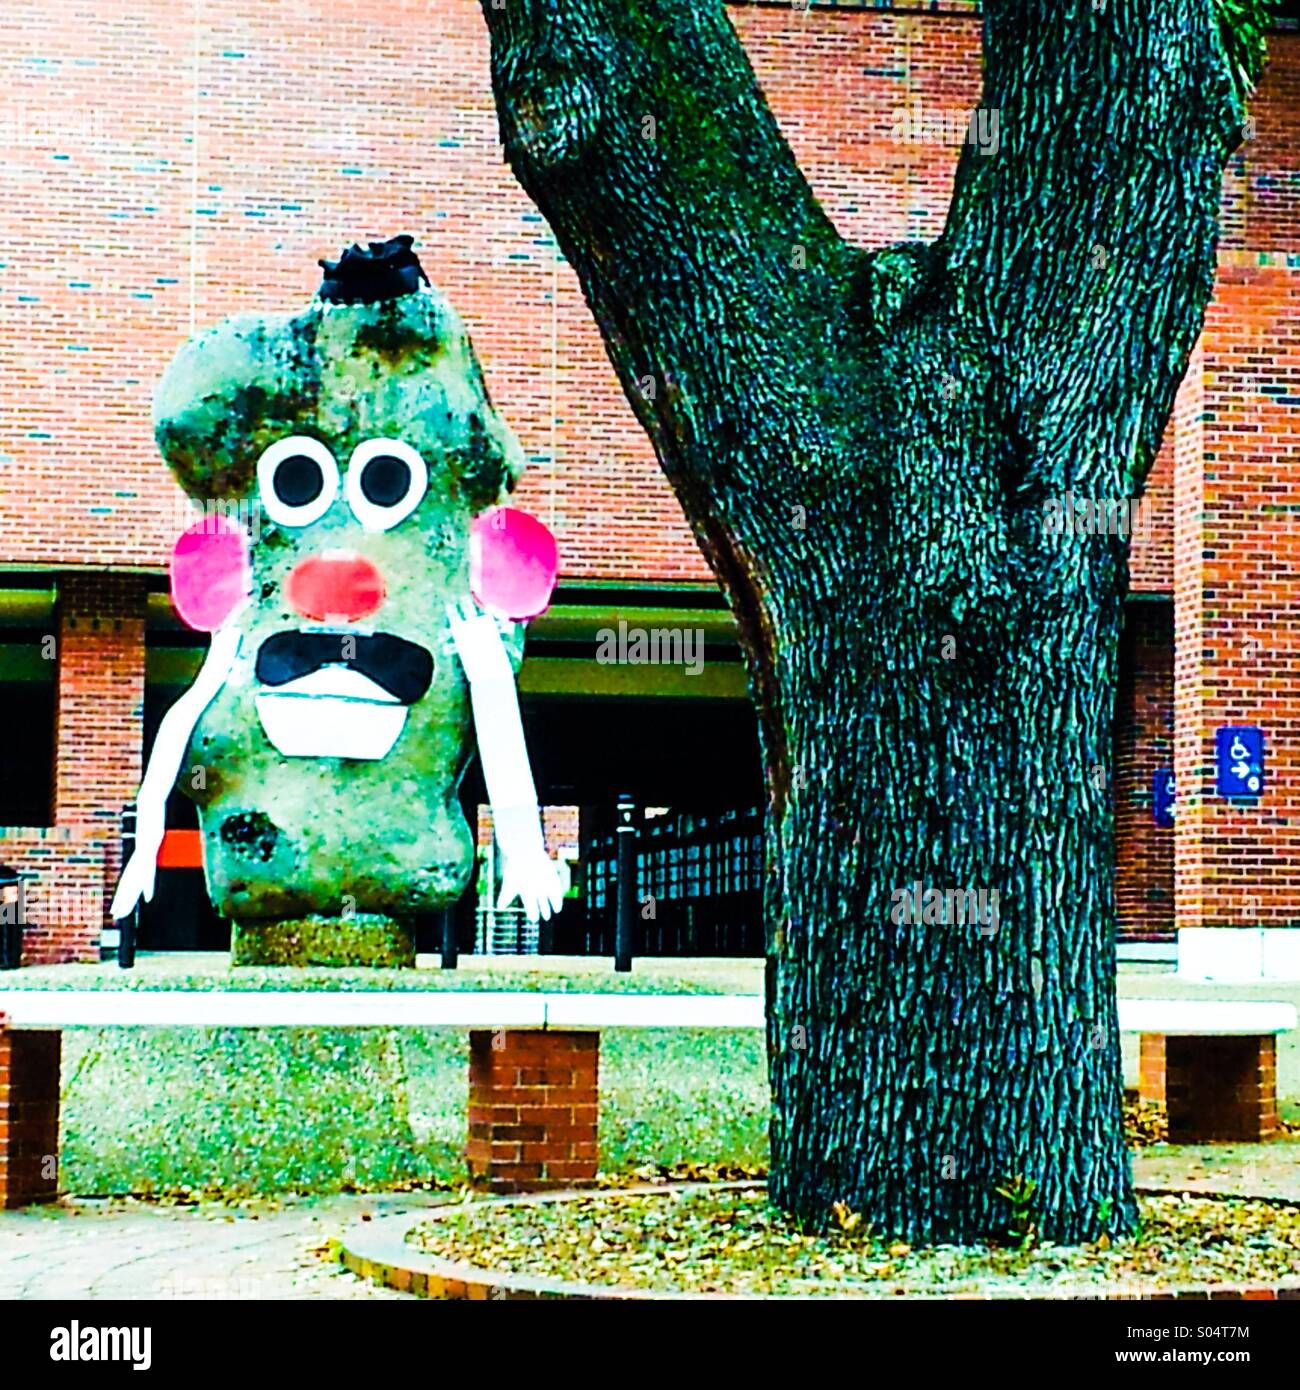 The Potato Sculpture is decorated as Mr. Potato Head by students for graduation week every spring on the University of Florida campus. Stock Photo